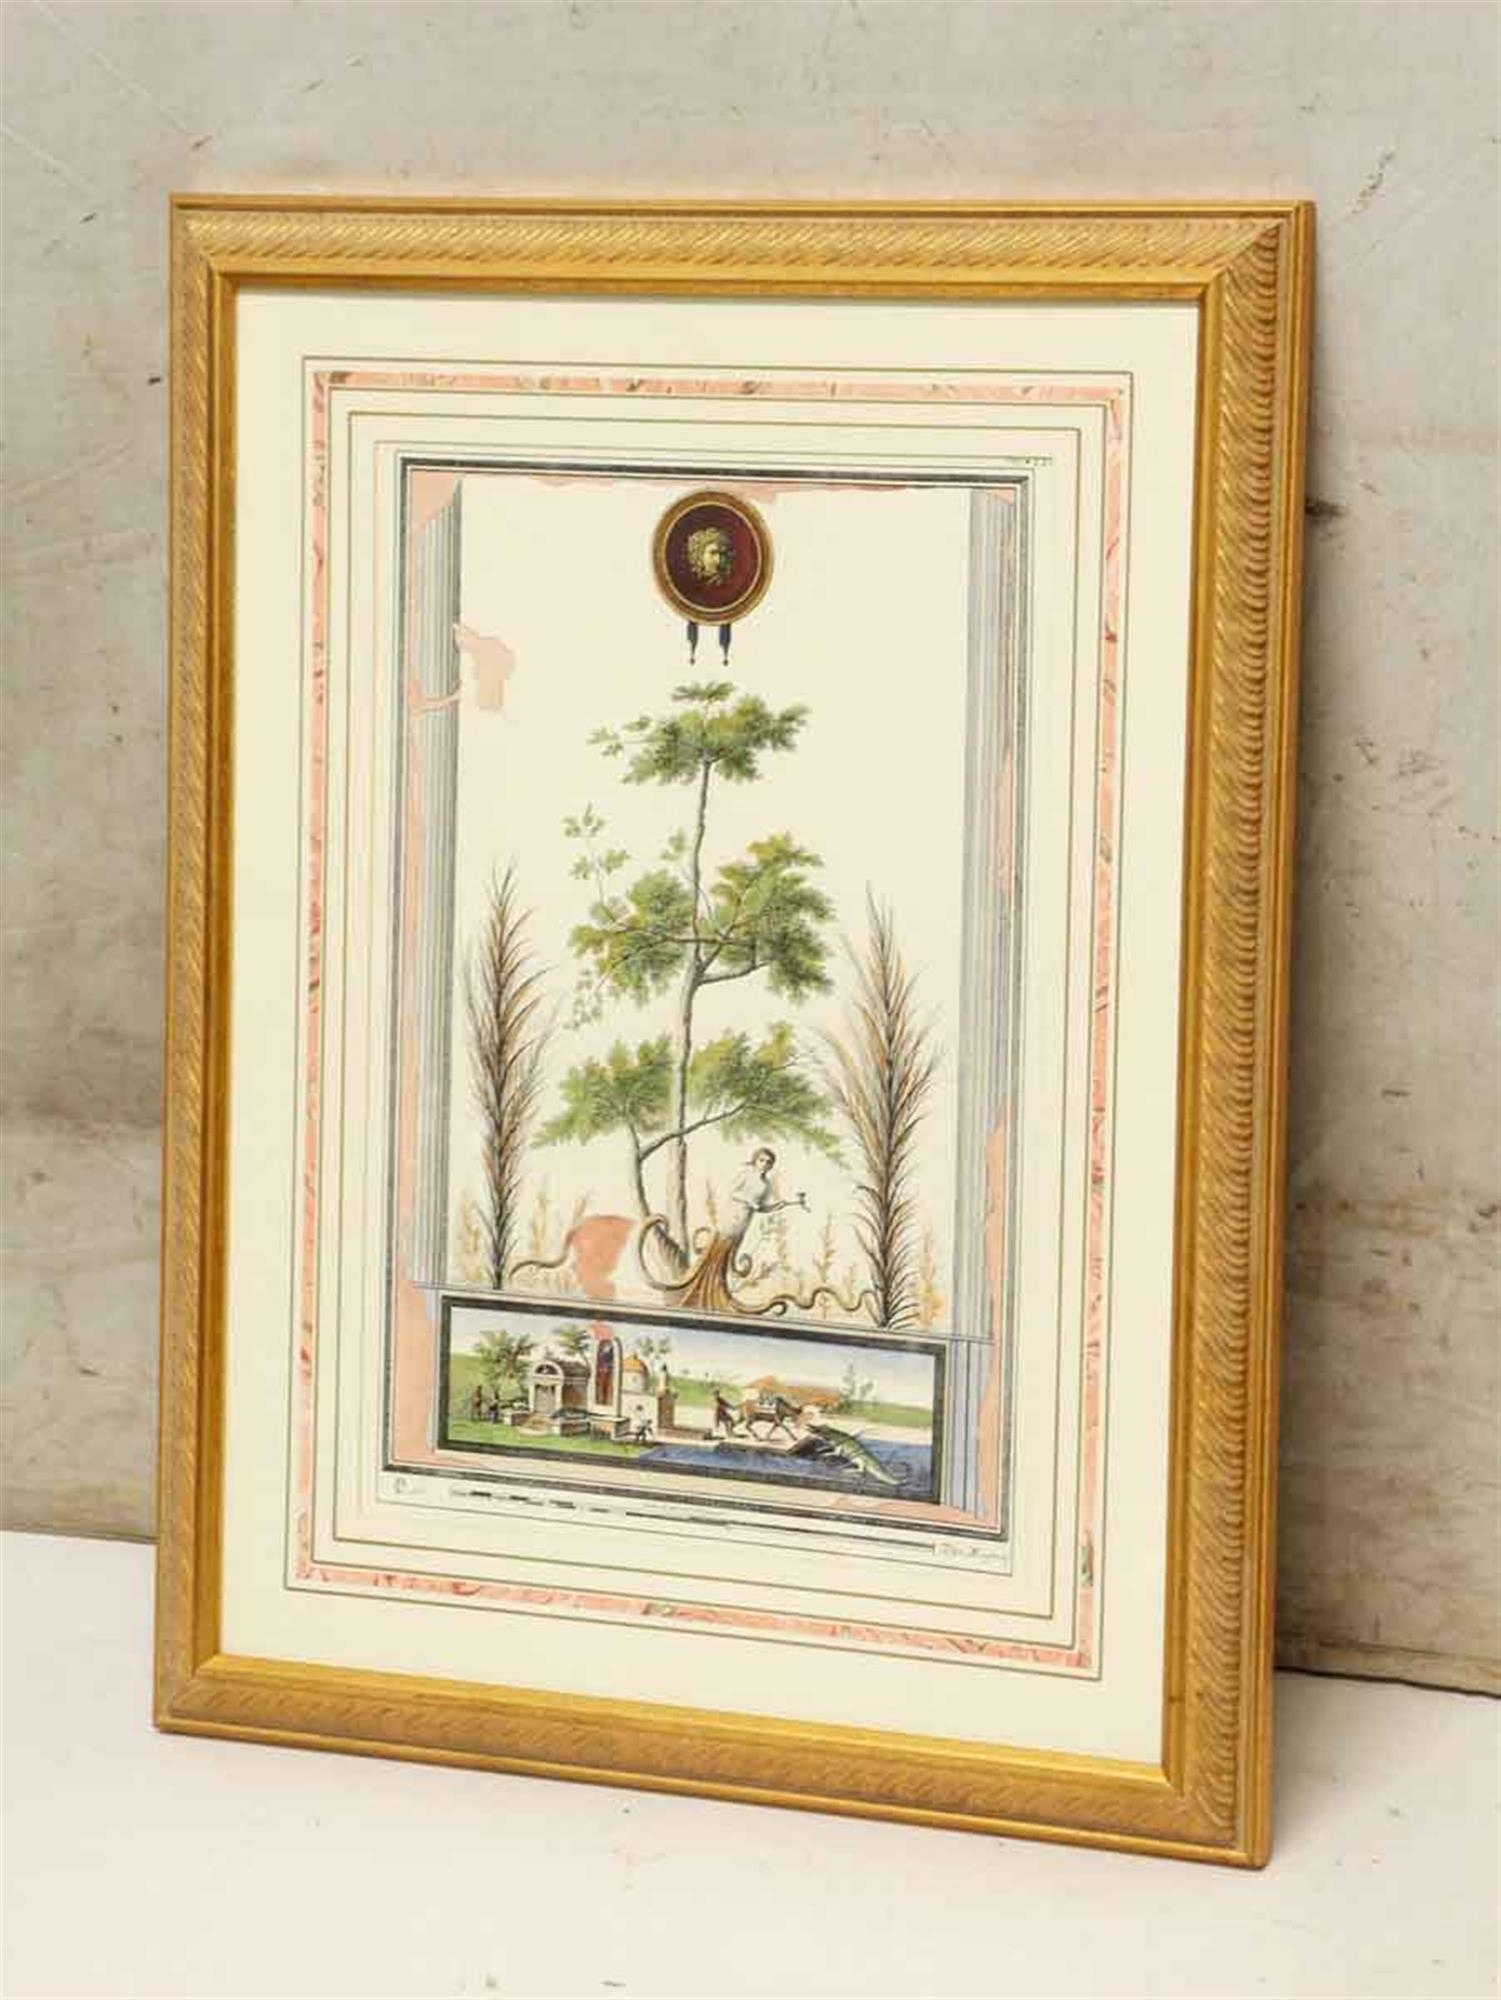 1960s Greek style decorative framed figural framed print. By Filpo Morghenf.. Inscribed Scale of Roman Palms to Scale of Neapolitan Palms. This can be viewed at our Scranton, Pennsylvania location. Please inquire for the exact address.